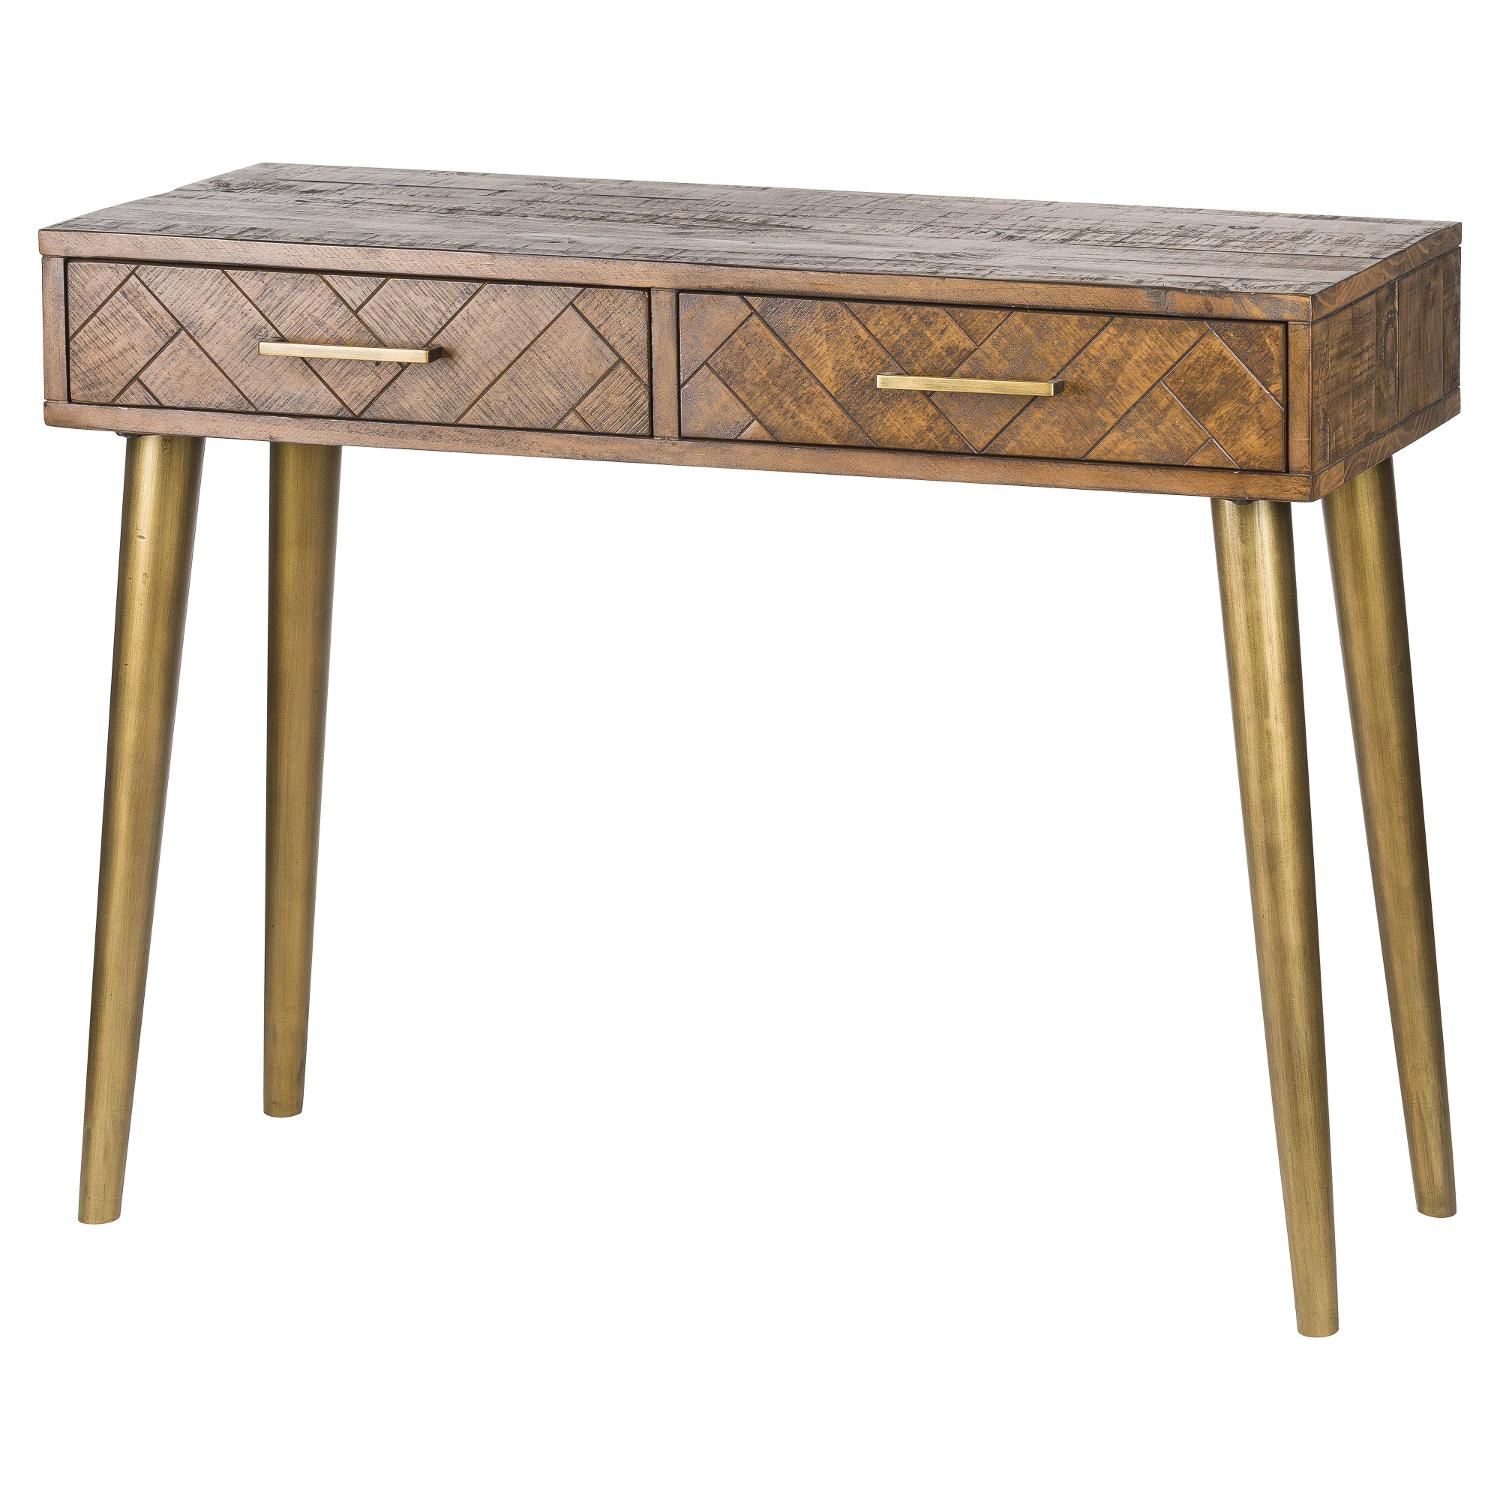 Havana Gold 2 Drawer Console Table | From Baytree Interiors Intended For Walnut Wood And Gold Metal Console Tables (View 2 of 20)